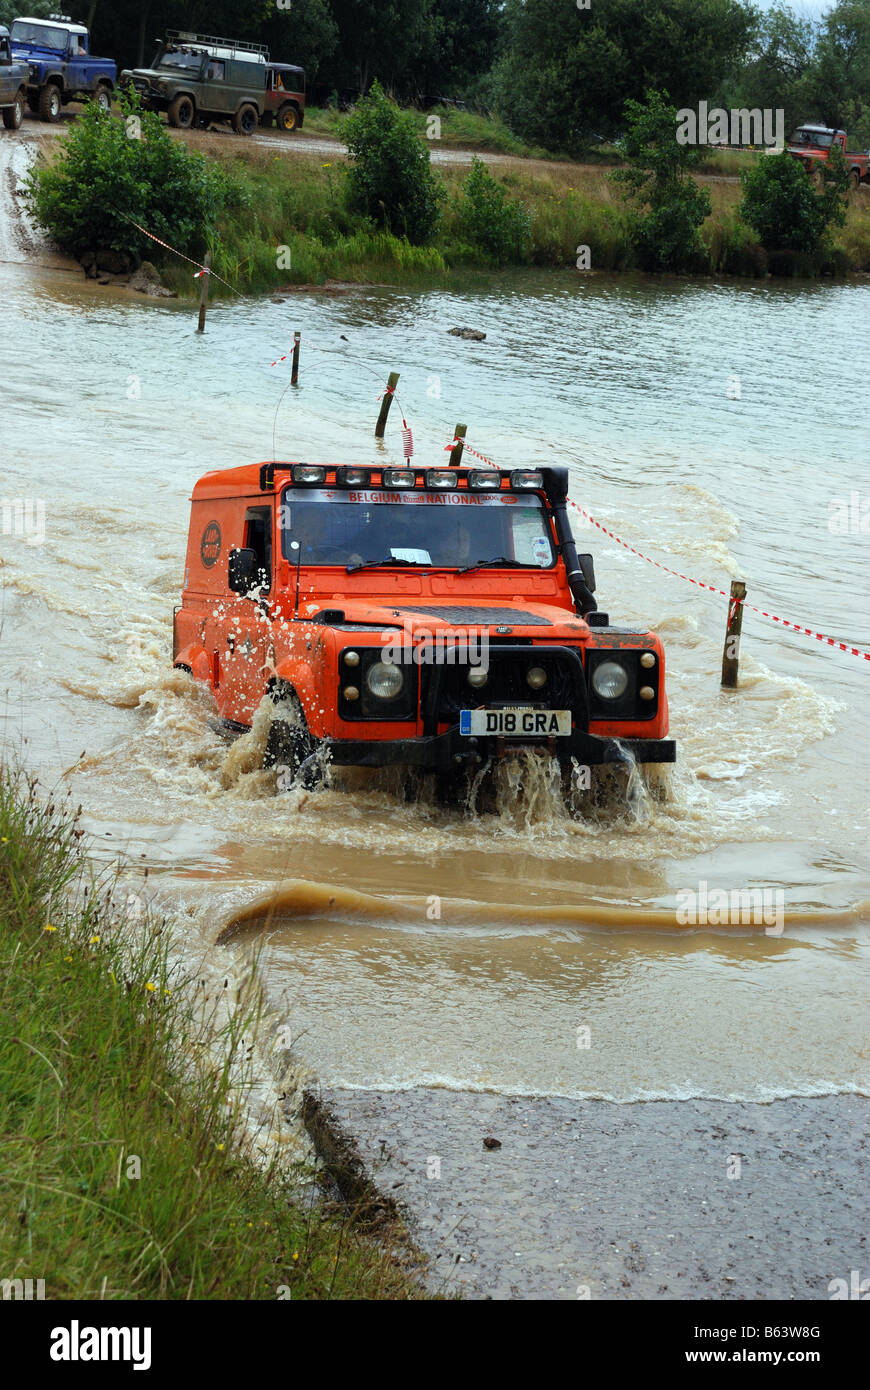 Land Rover Defender short wheelbase 90 exits the water at Billing 2008 4WD Registration number D18 GRA four wheel drive LRM Show Stock Photo